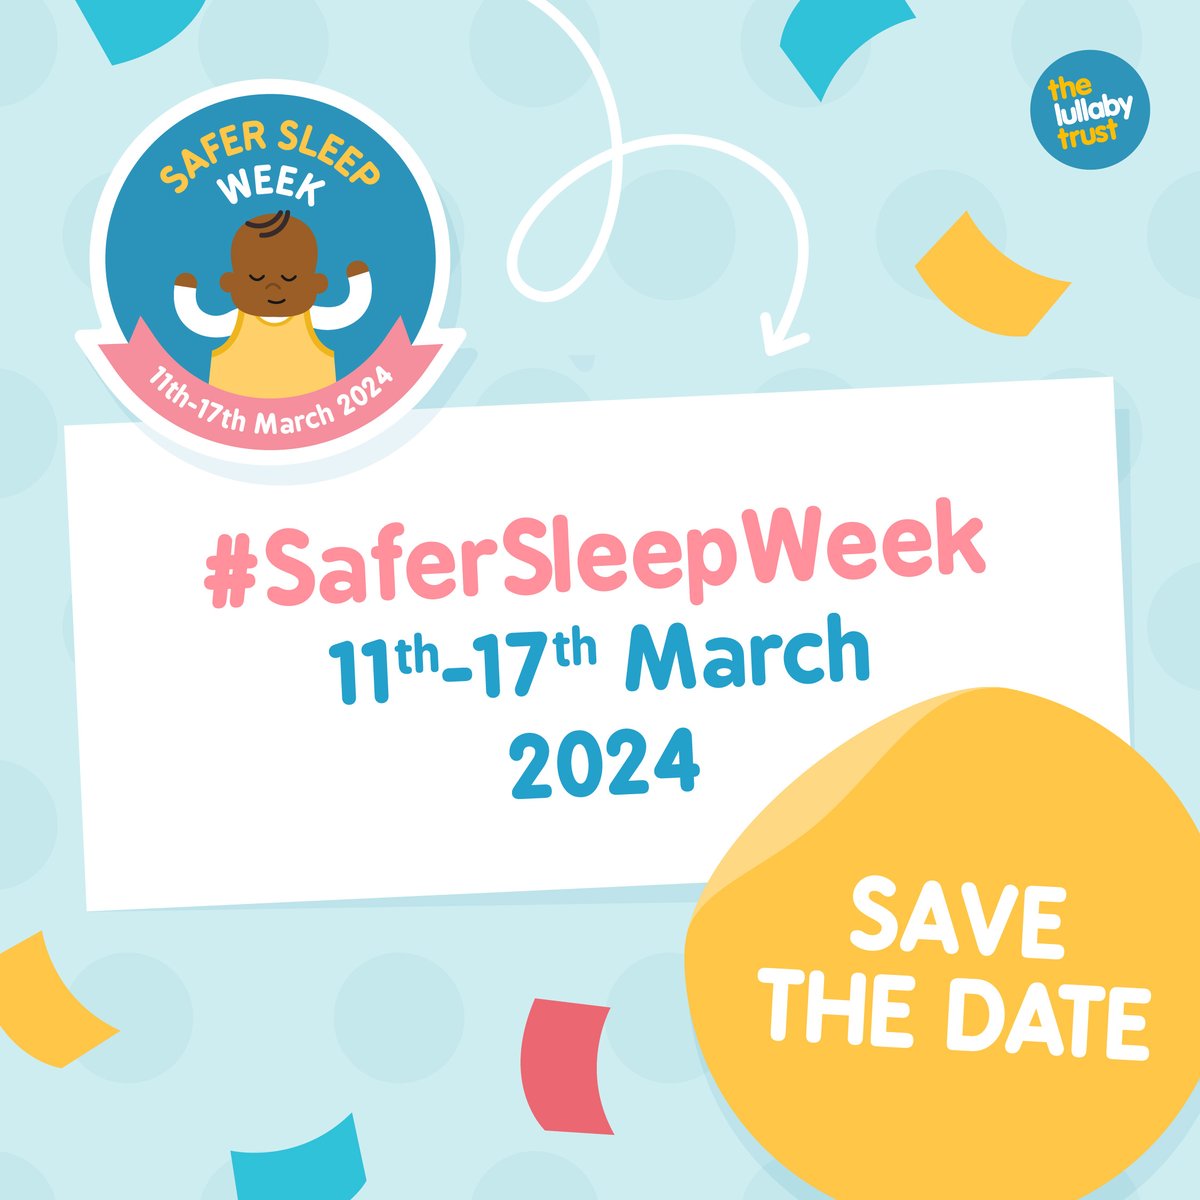 11-17 Mar is #SaferSleepWeek Our safer sleep advice has saved 30,000 babies’ lives in the last 30 years but we can only keep this going by reaching each new family with our vital life-saving advice. Safer Sleep Week is a big part of that. Please join in however you can!